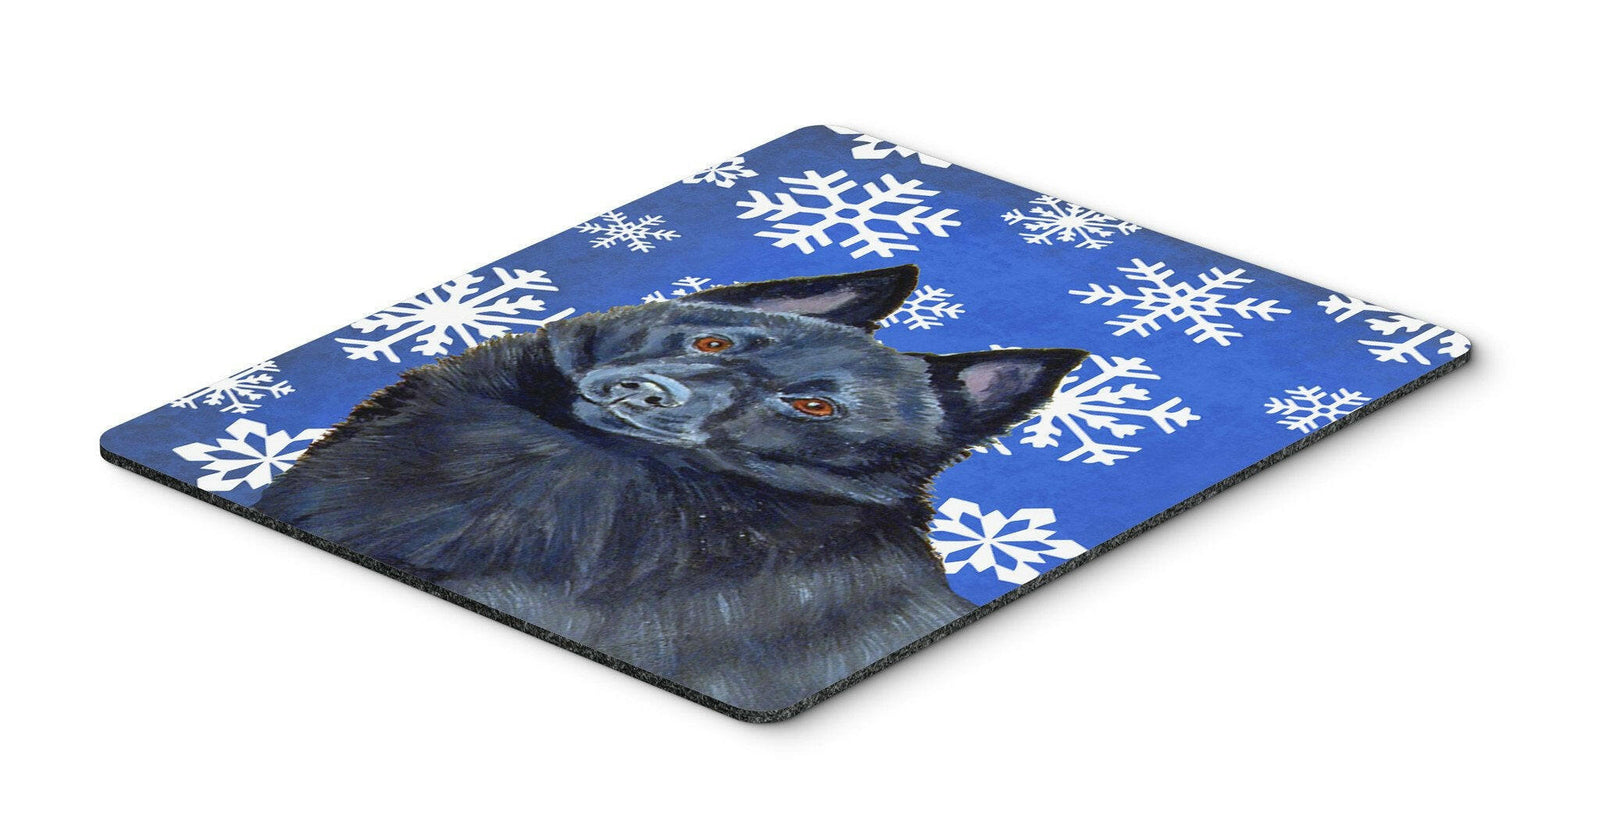 Schipperke Winter Snowflakes Holiday Mouse Pad, Hot Pad or Trivet by Caroline's Treasures